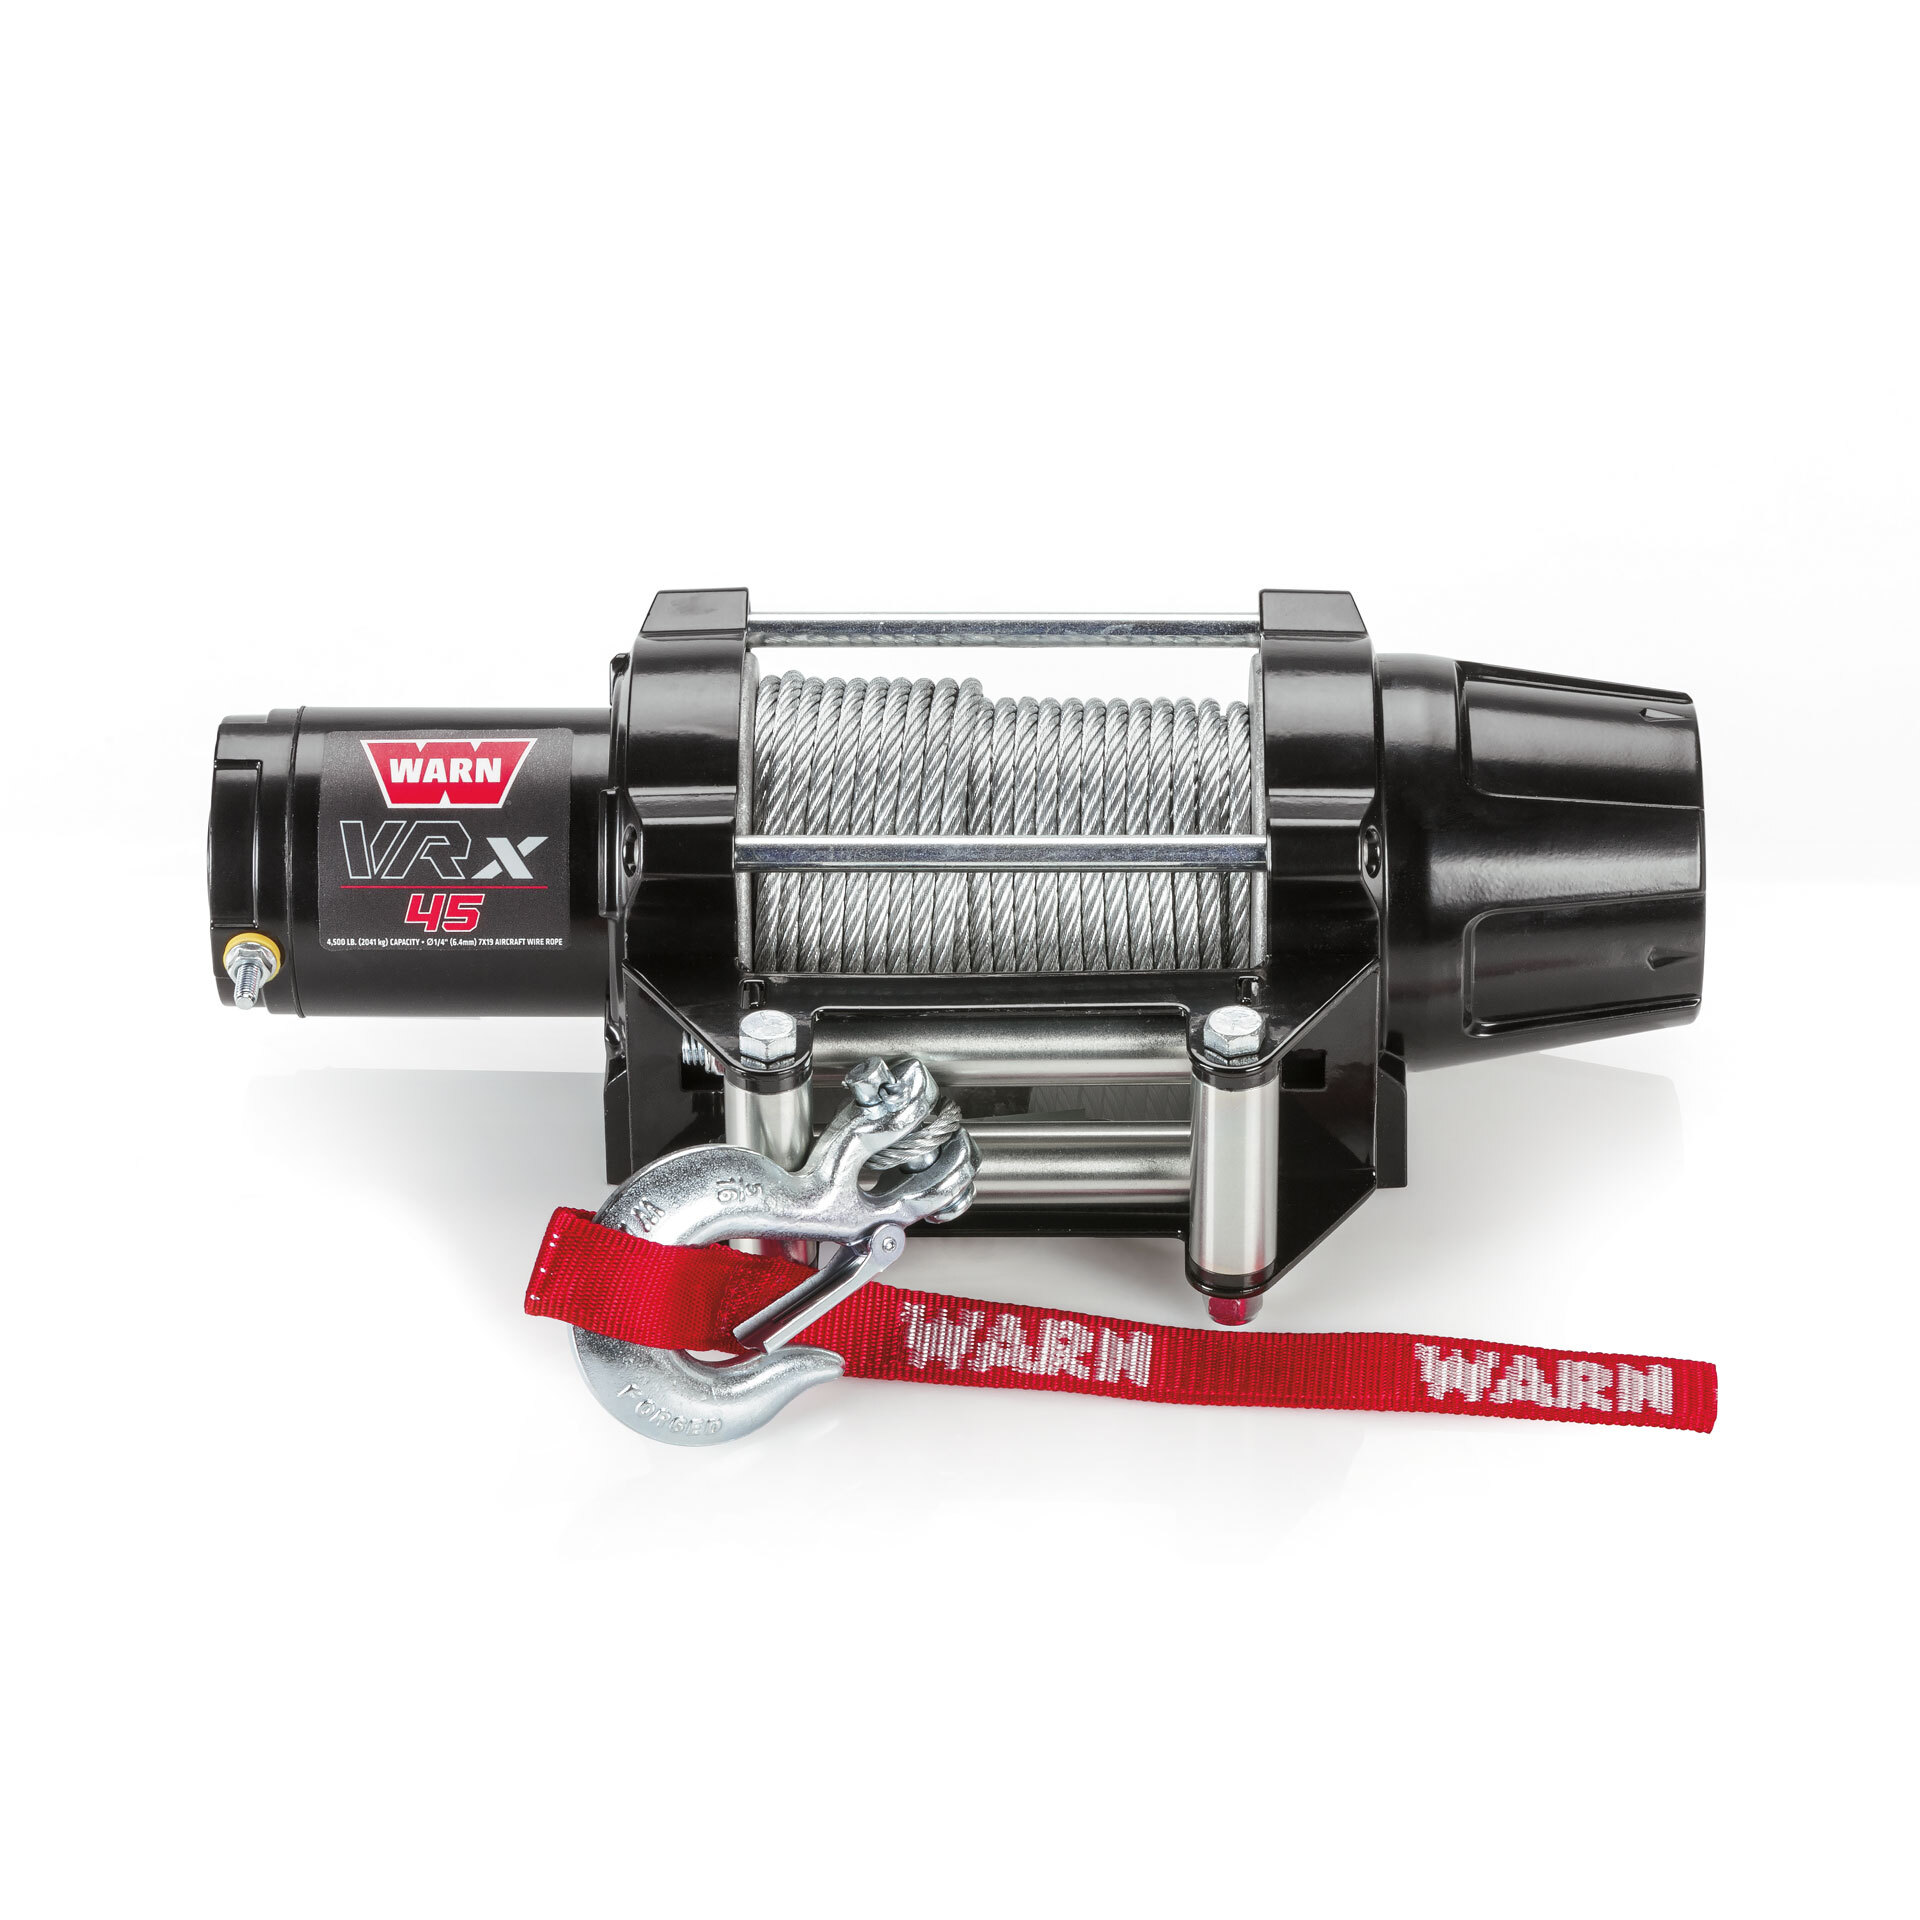 WARN® VRX 4500 Winch with Wire Rope